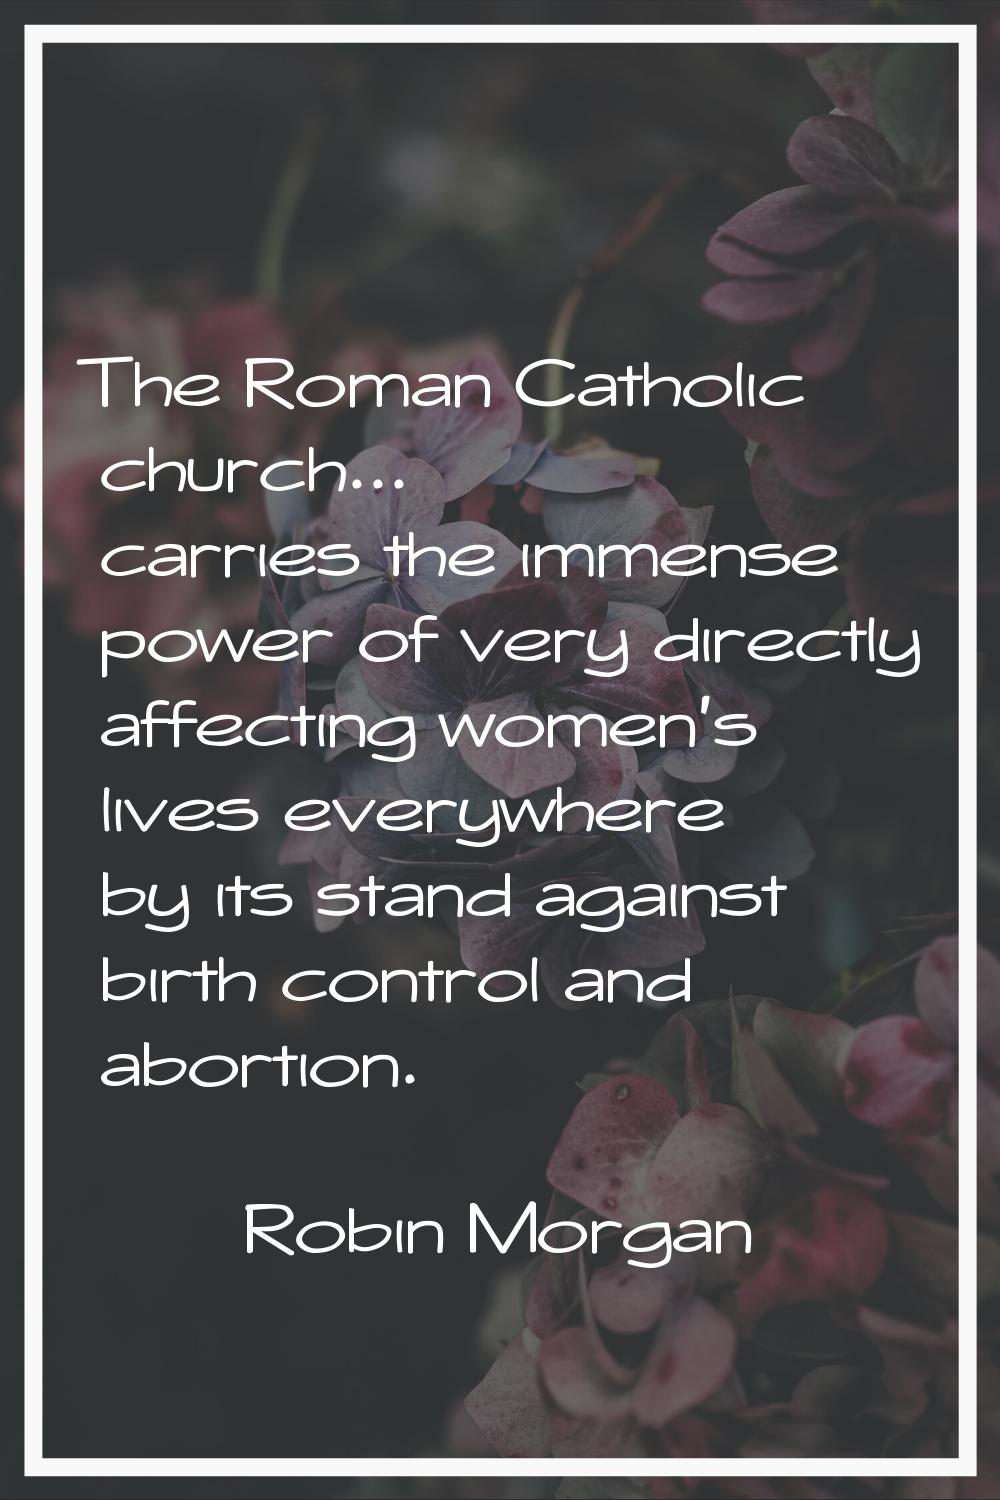 The Roman Catholic church... carries the immense power of very directly affecting women's lives eve